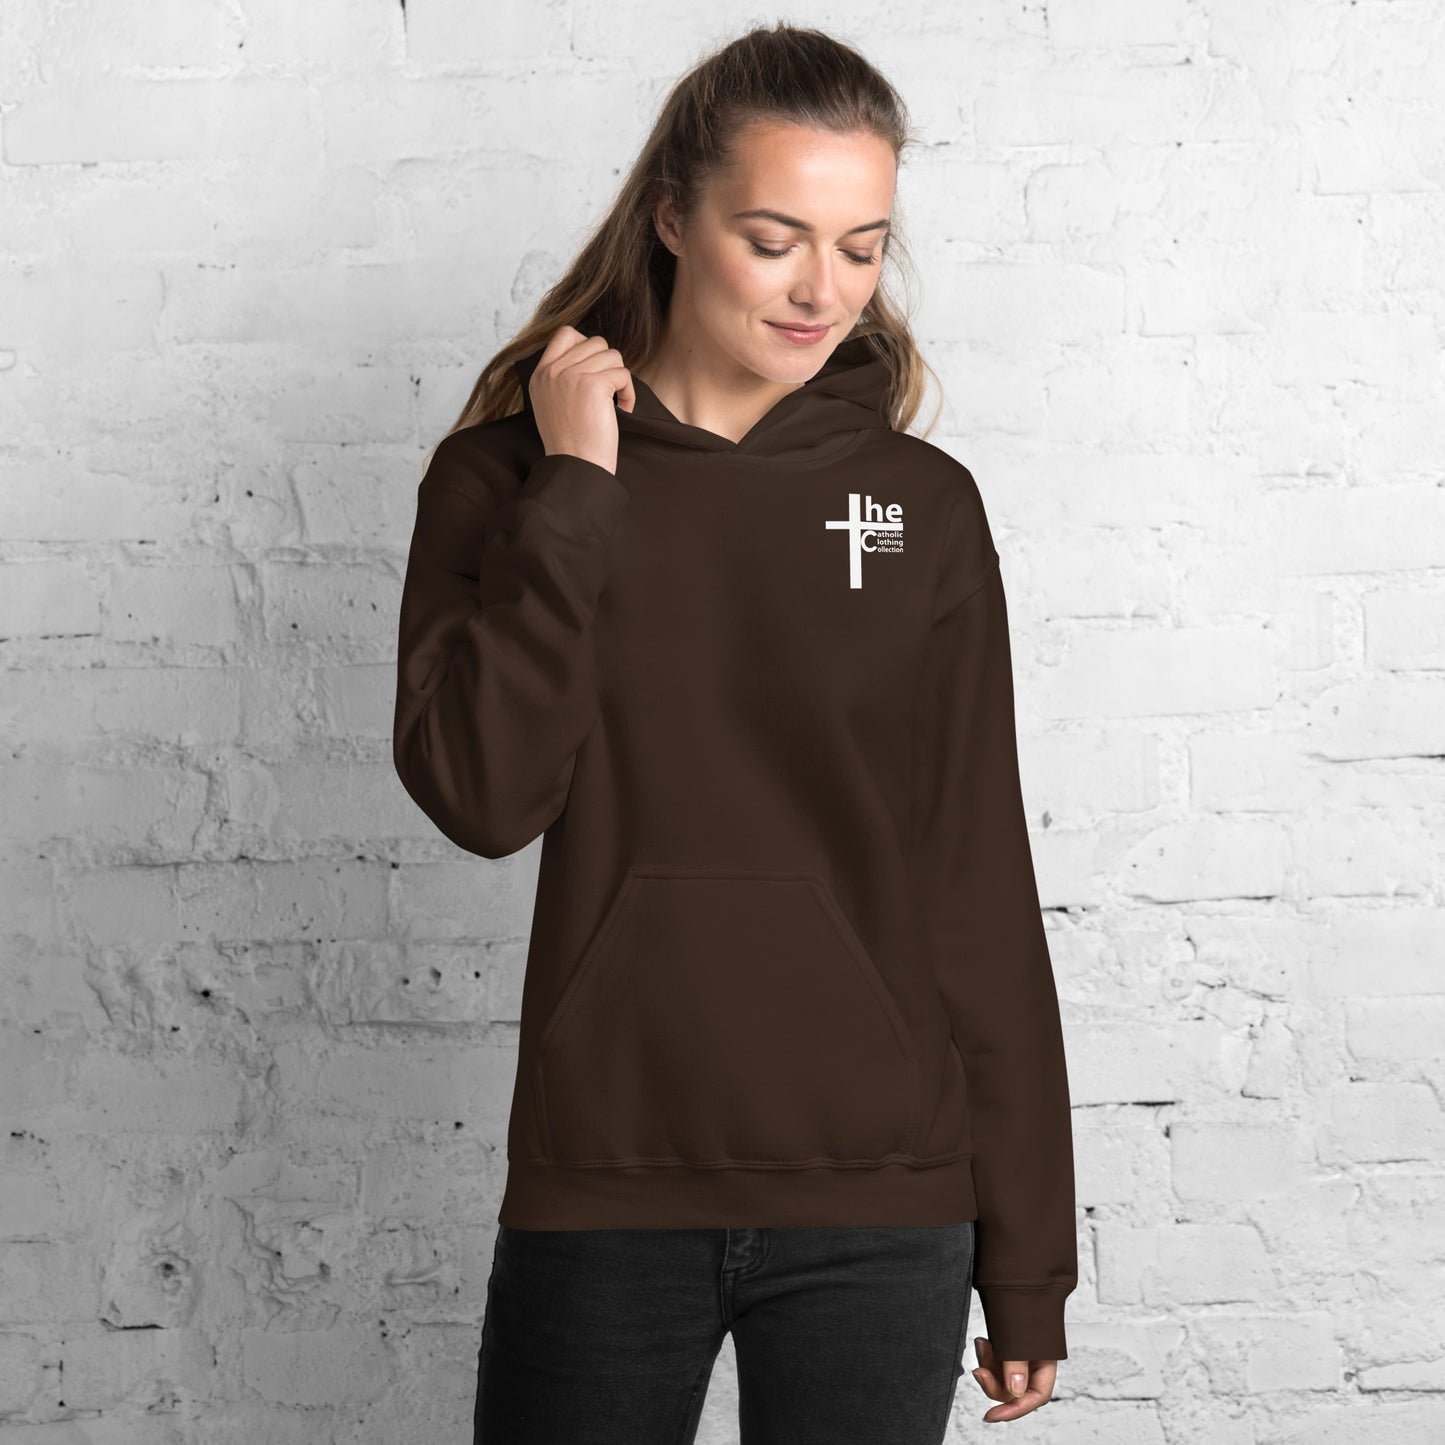 Our Lady of Lourdes Women's Hoodie